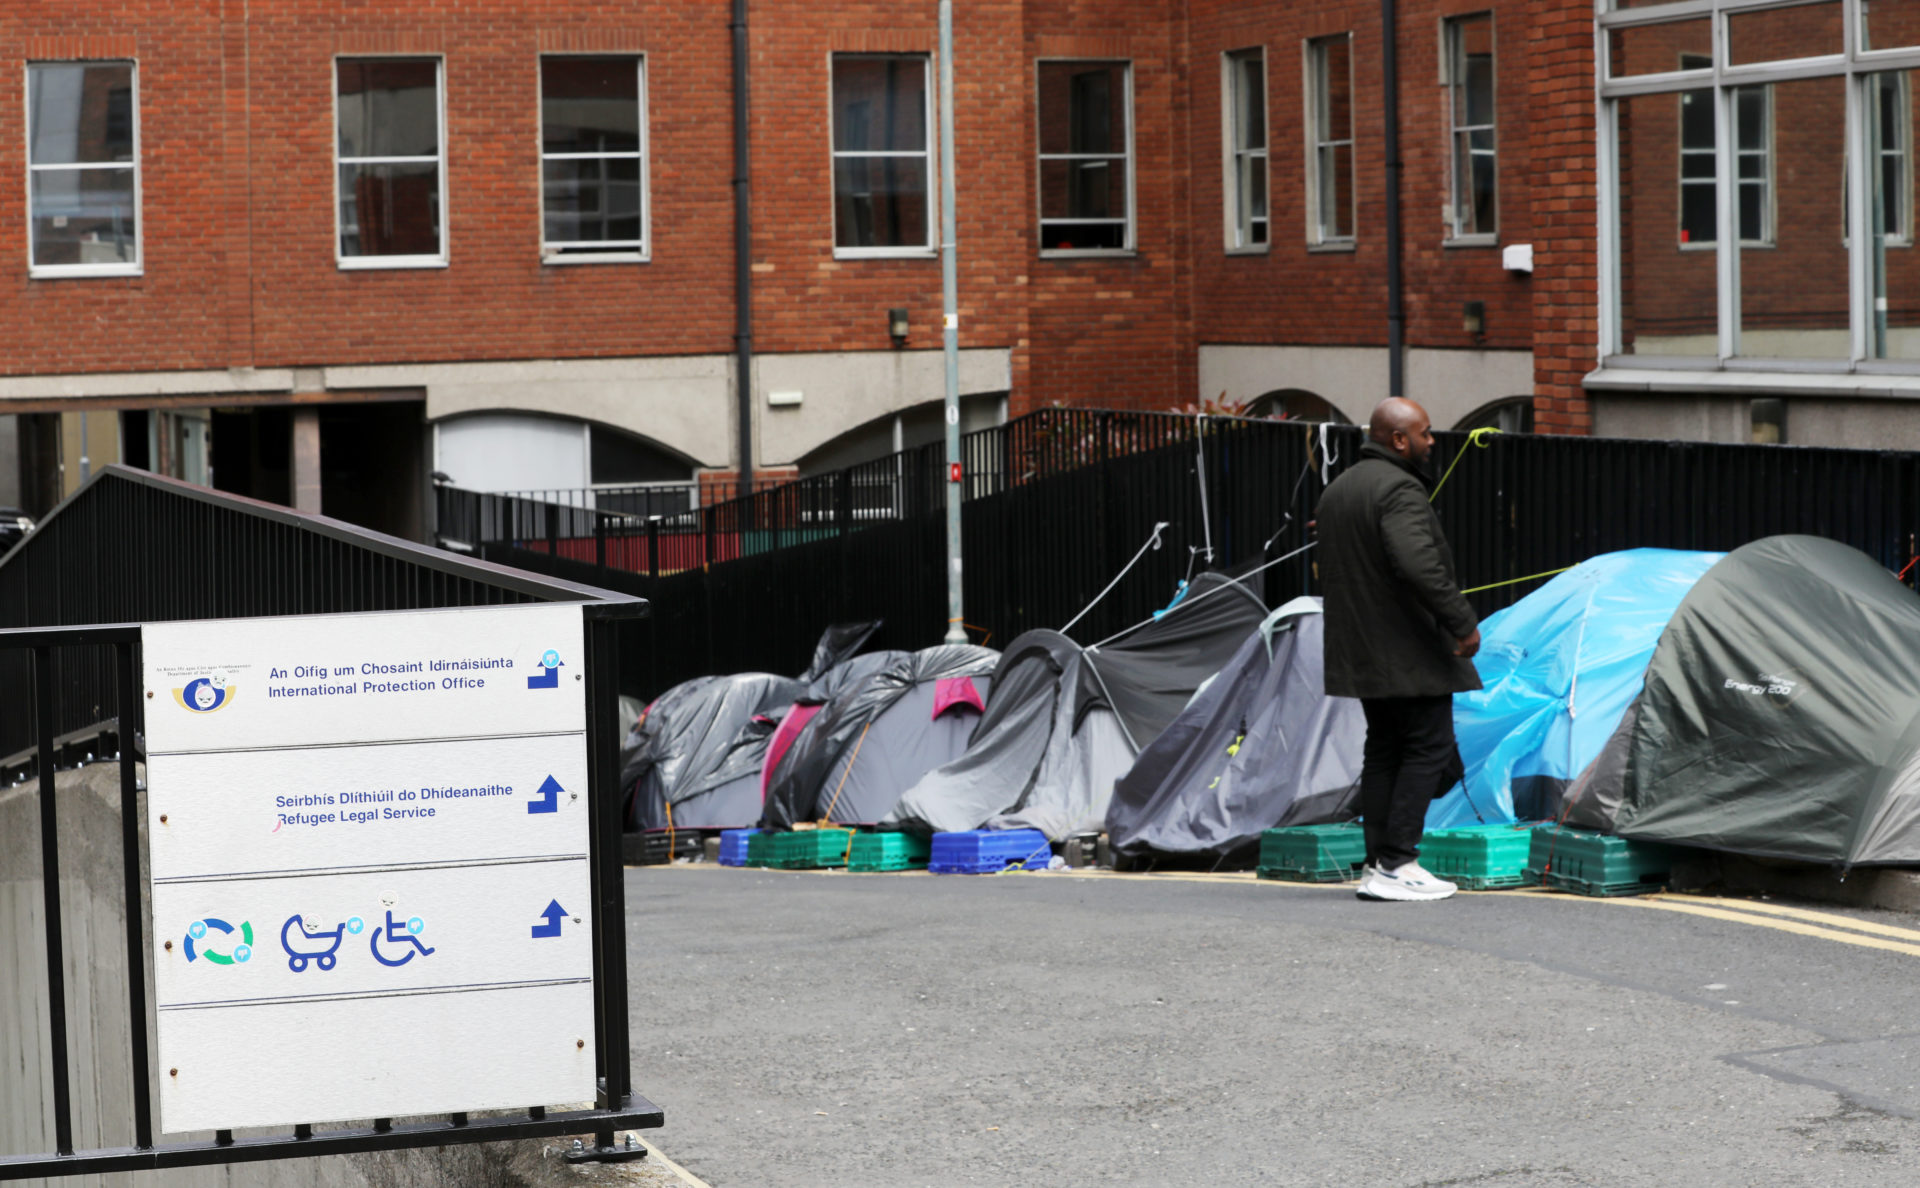 Pictured are tents outside the International Protection Office on Mount Street. Asylum seekers who have not been provided with accomodation have pitched their tents here in protest.